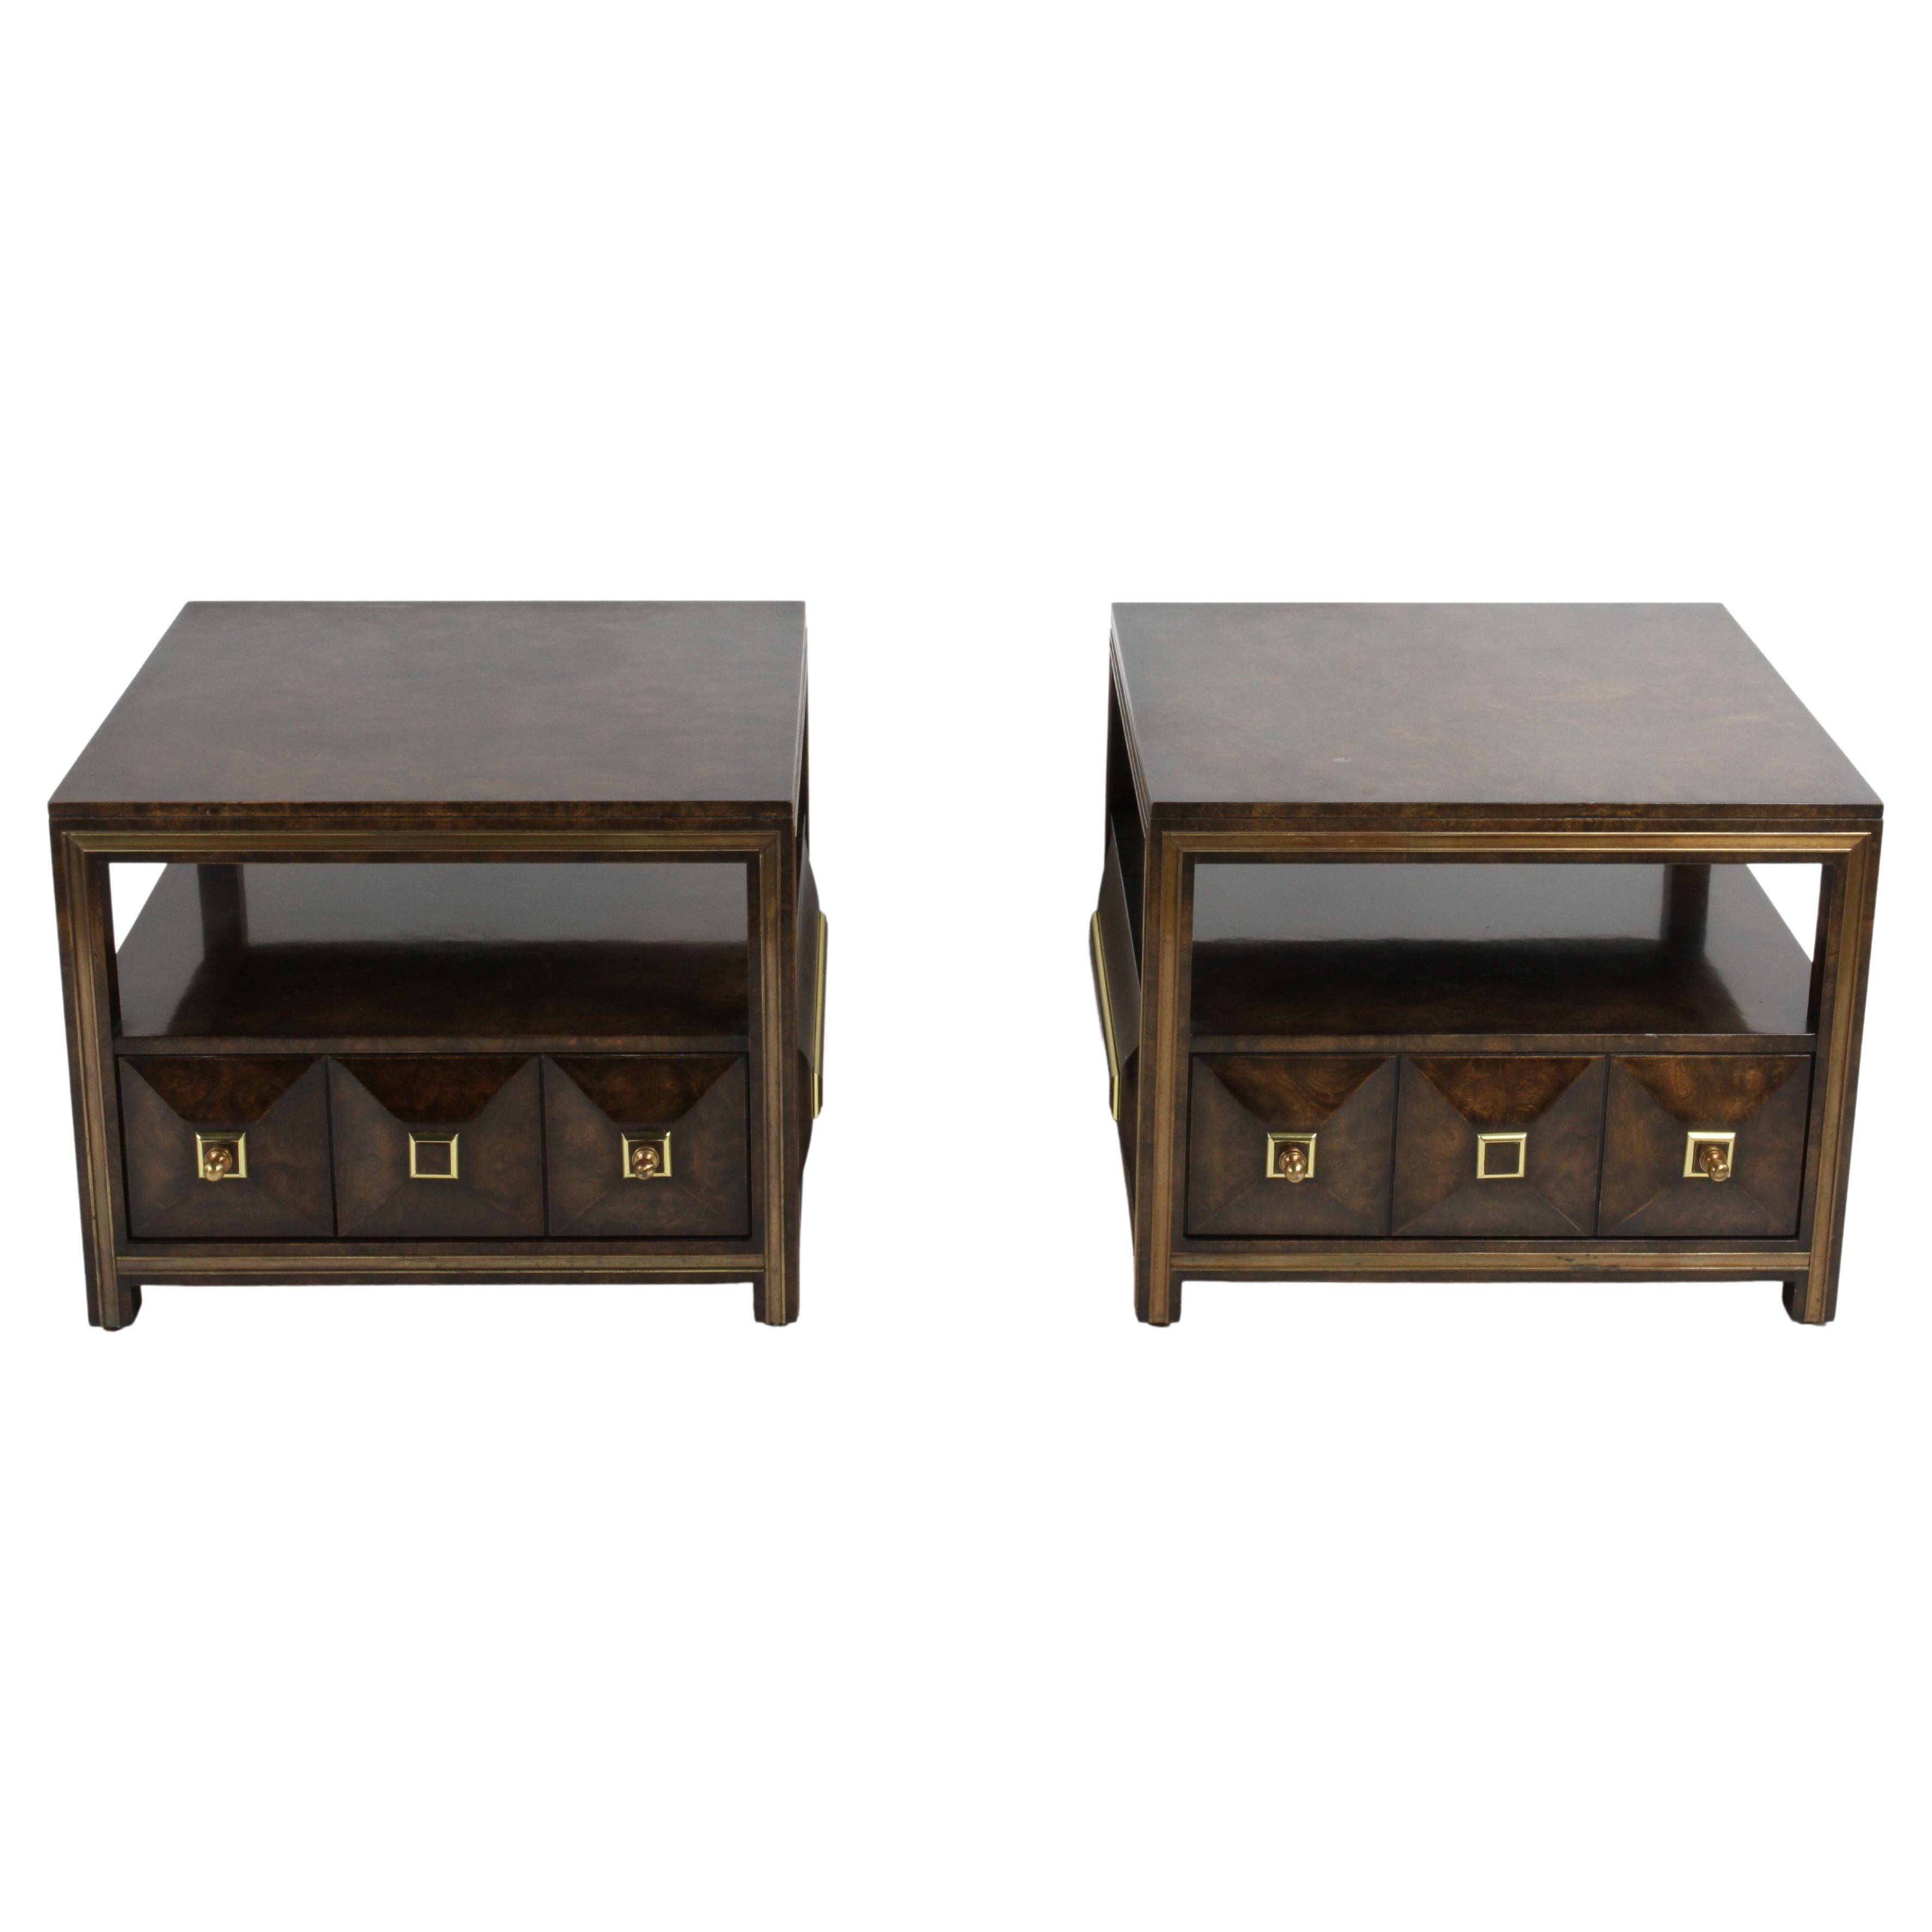 Pair of Large Mastercraft Burl Elm & Brass End Tables or Night Stands w/ Drawers